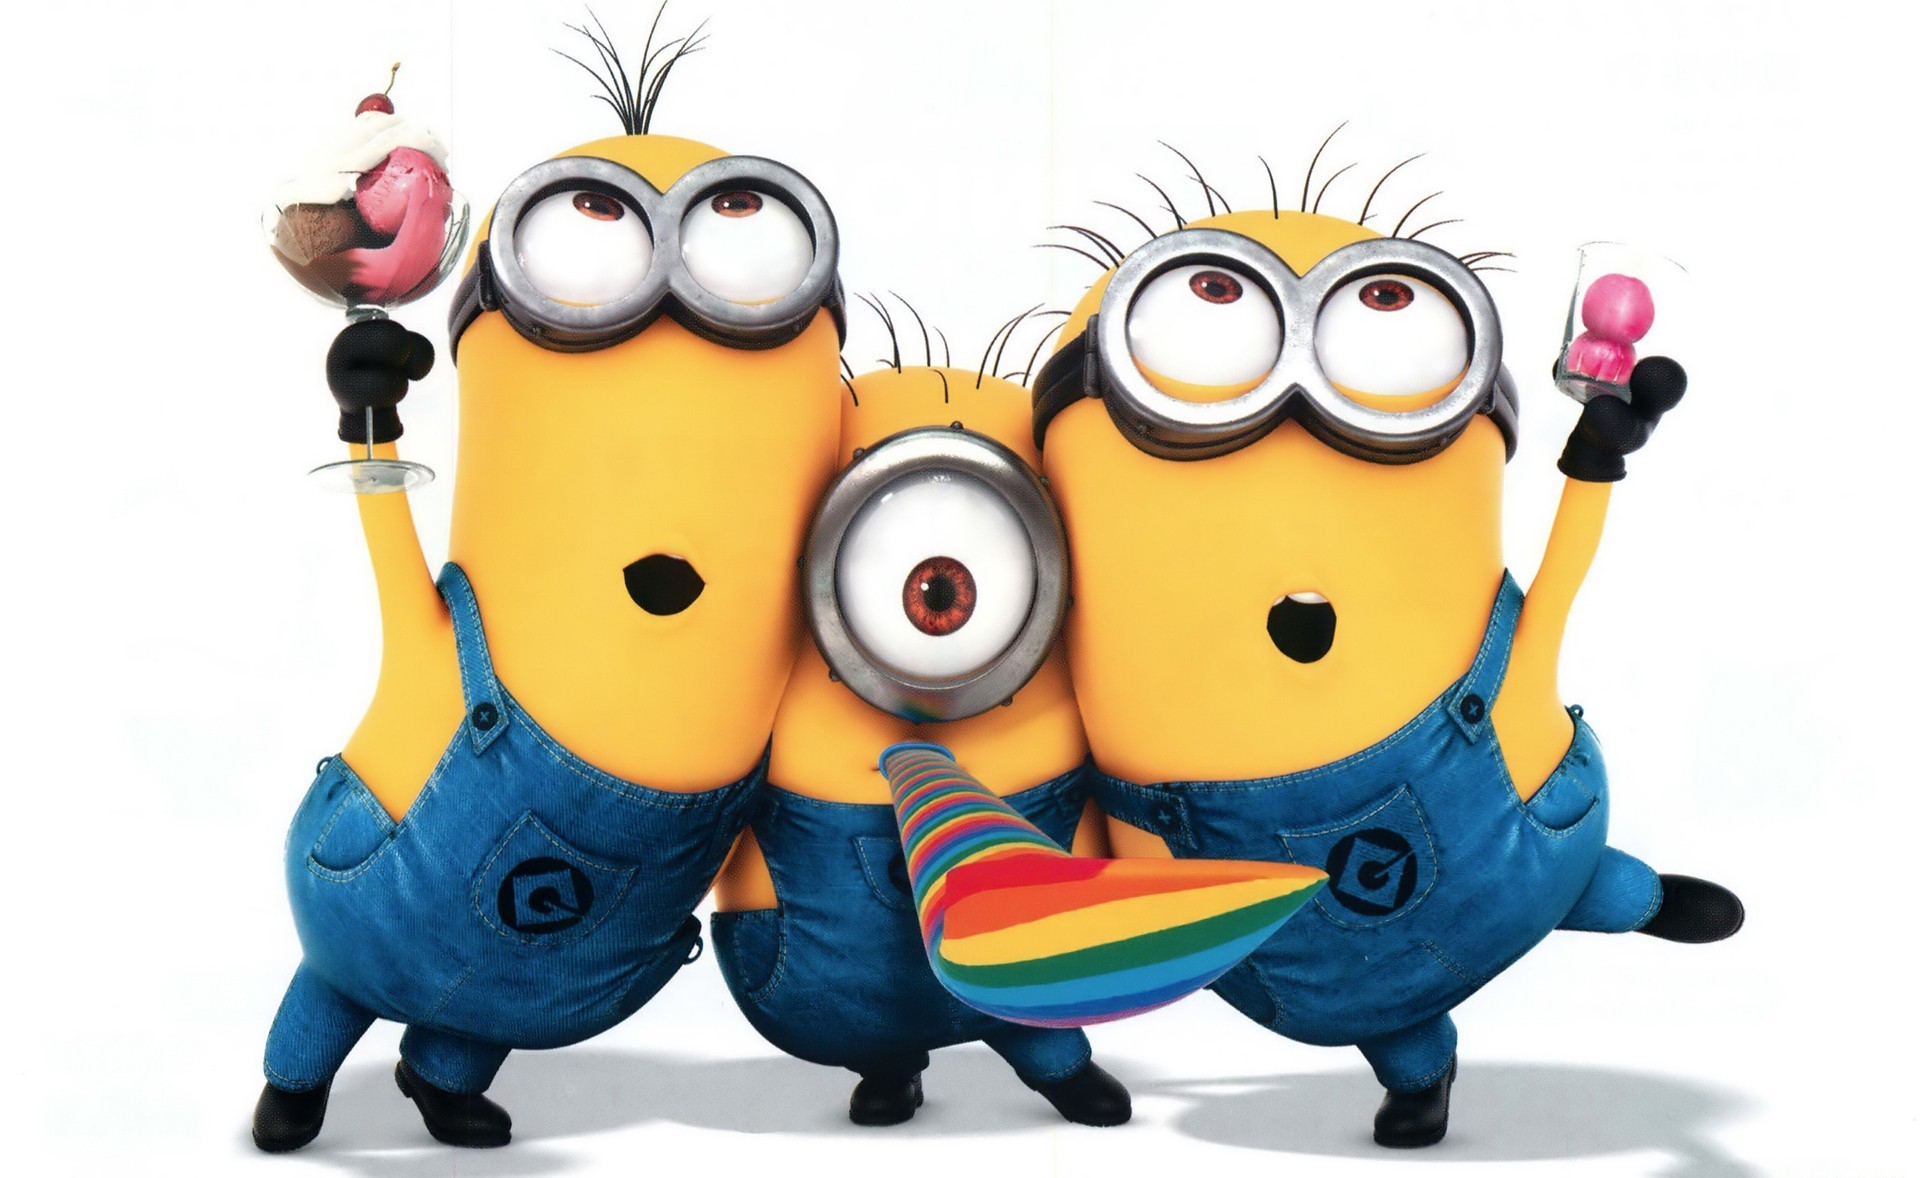 Minions, Despicable Me 2, Animated Movies Backgrounds